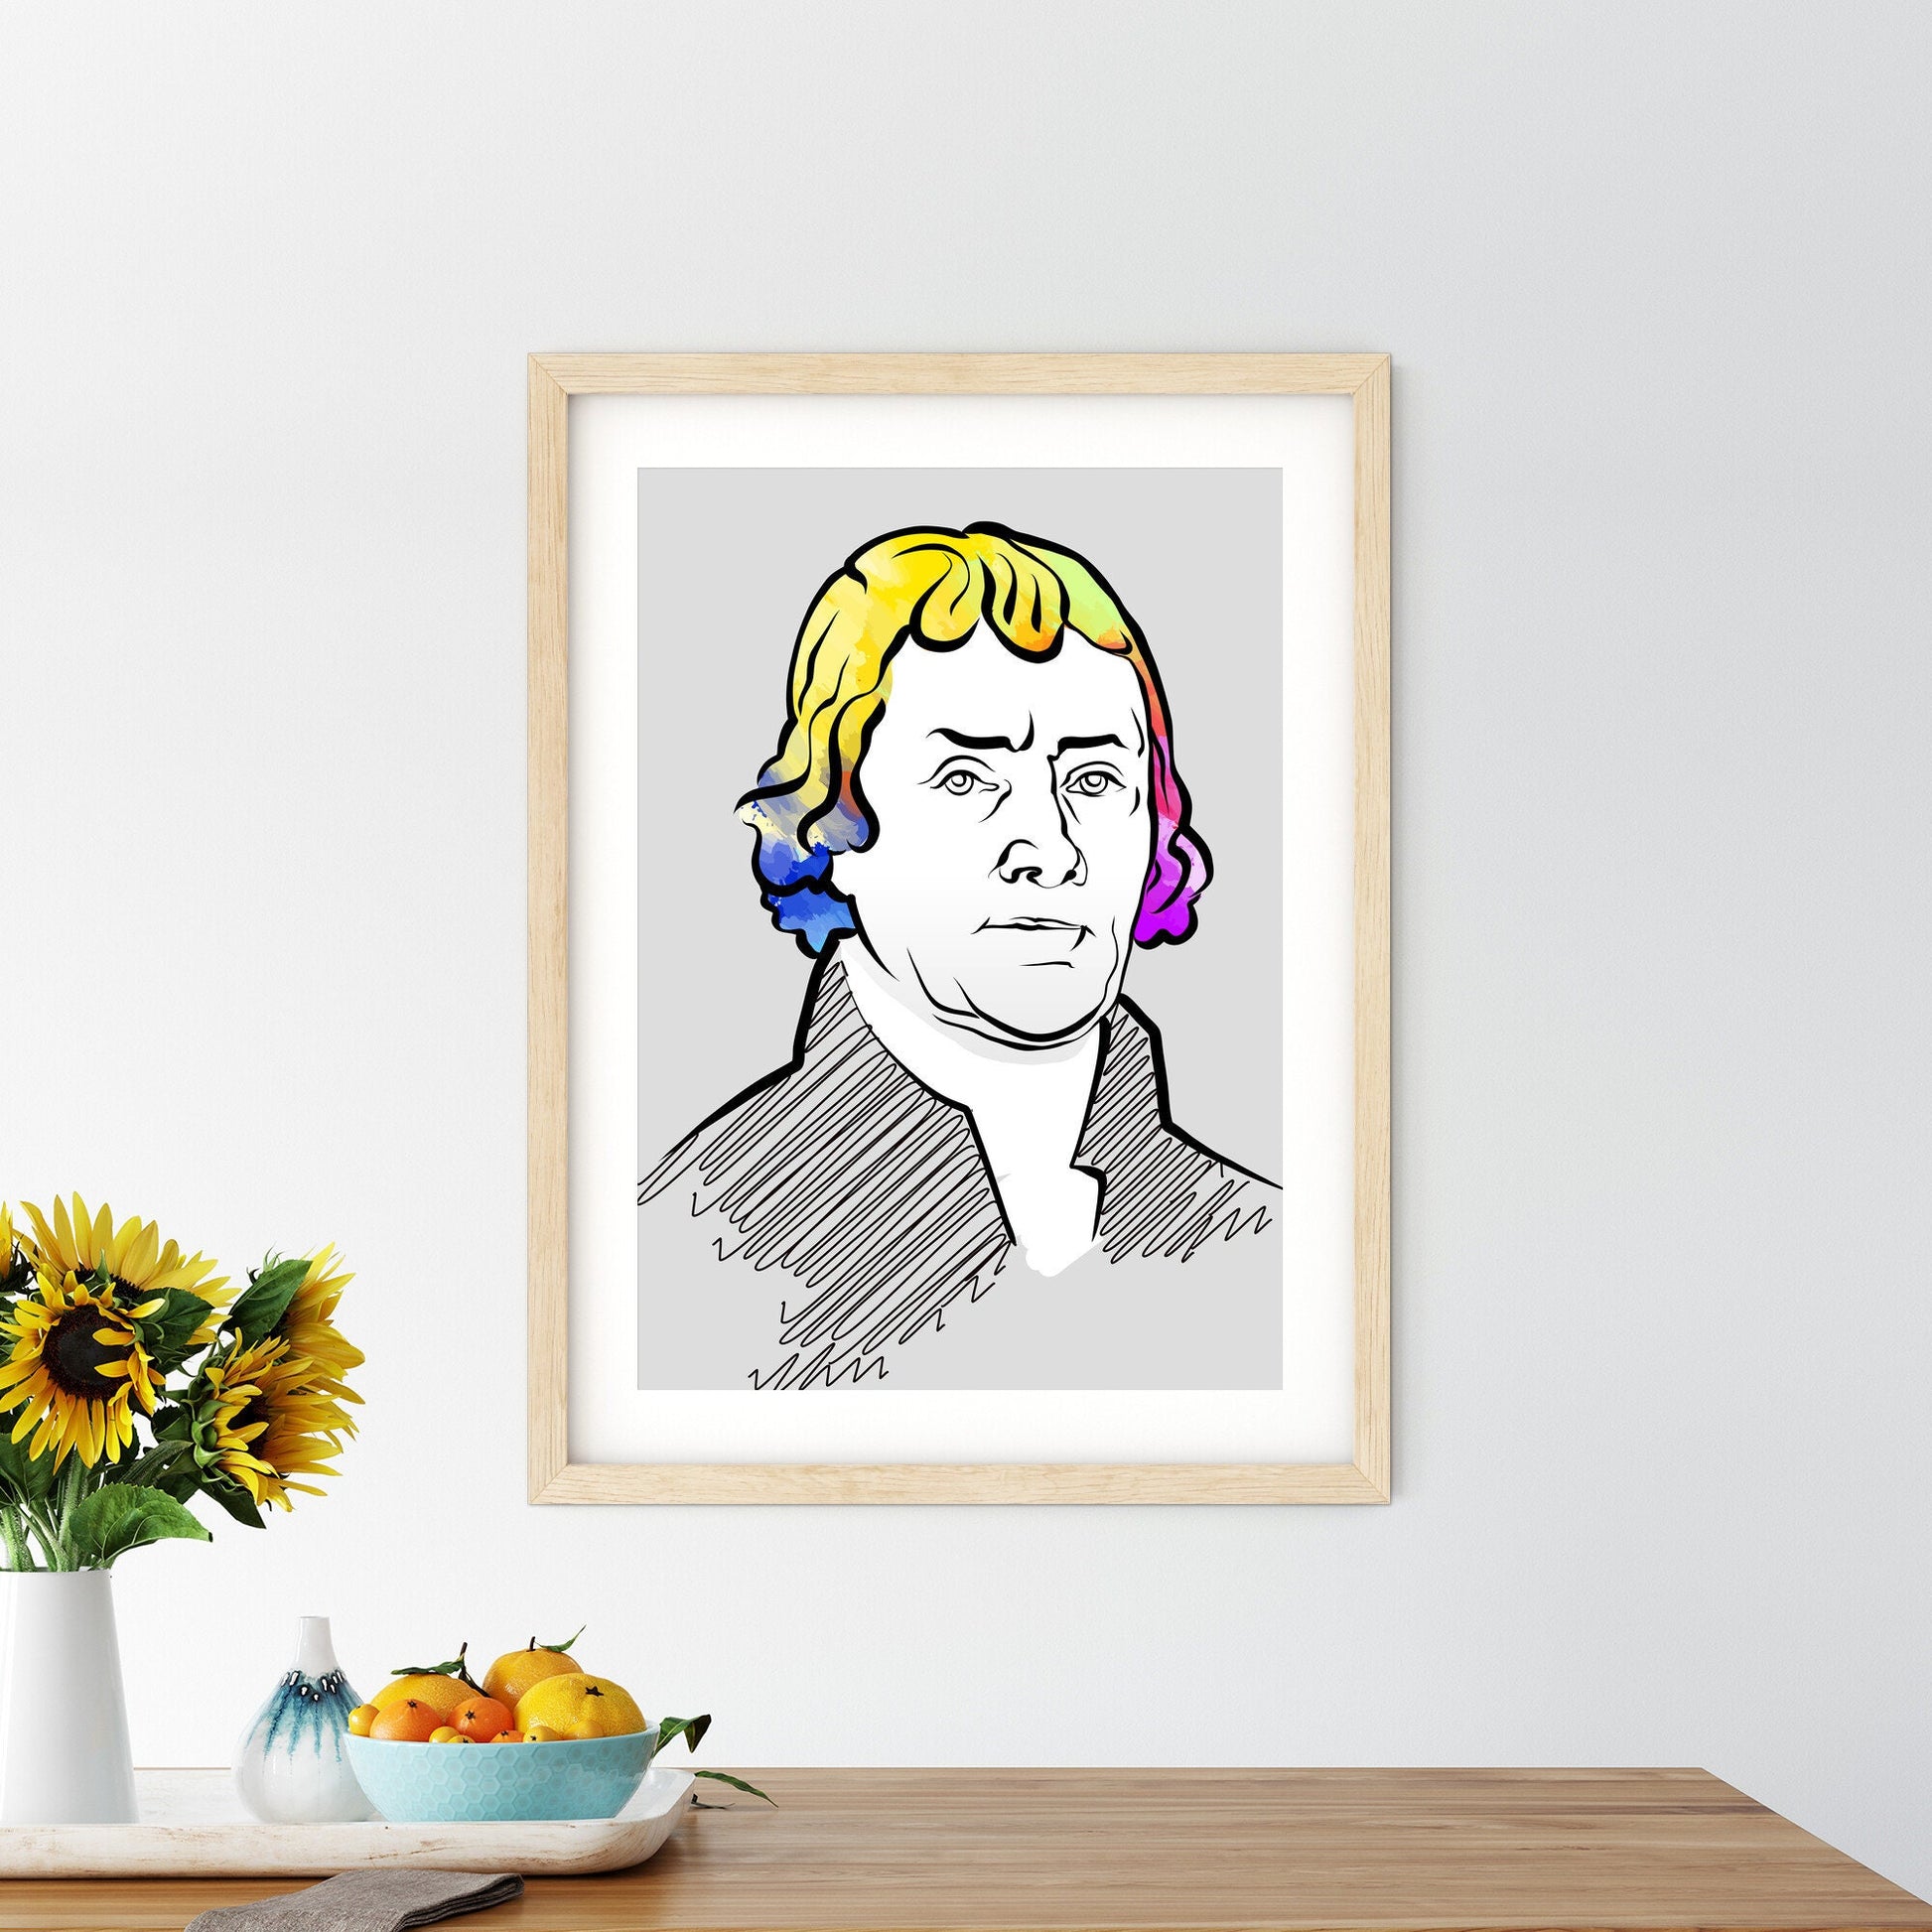 Thomas Jefferson Portrait Poster With Colorful Hair. Perfect print for patriots.